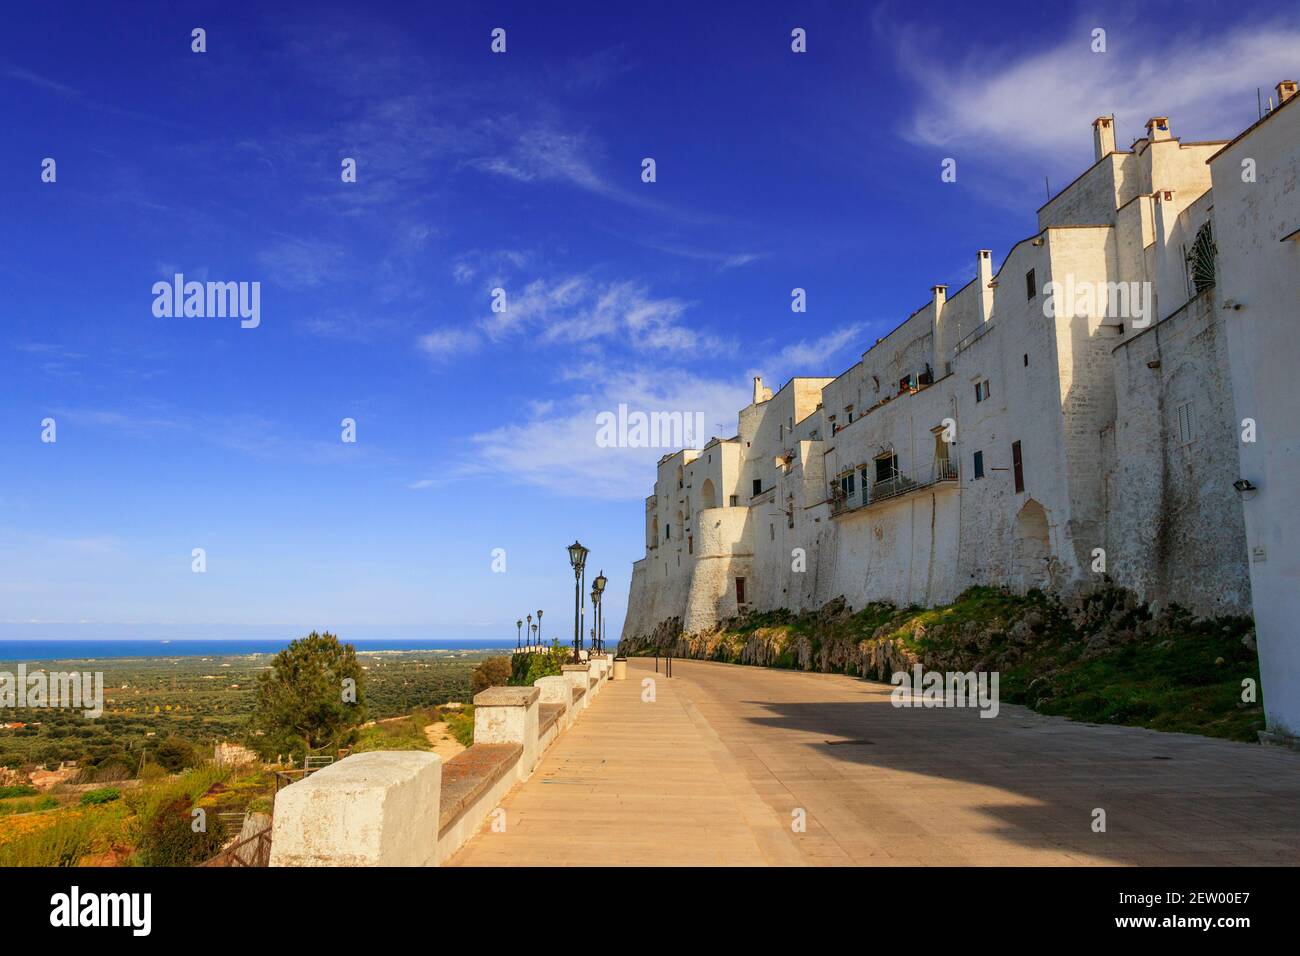 Ostuni old town, Puglia, Italy.It's commonly referred to as 'the White Town' for its white walls and its typically white painted architecture. Stock Photo